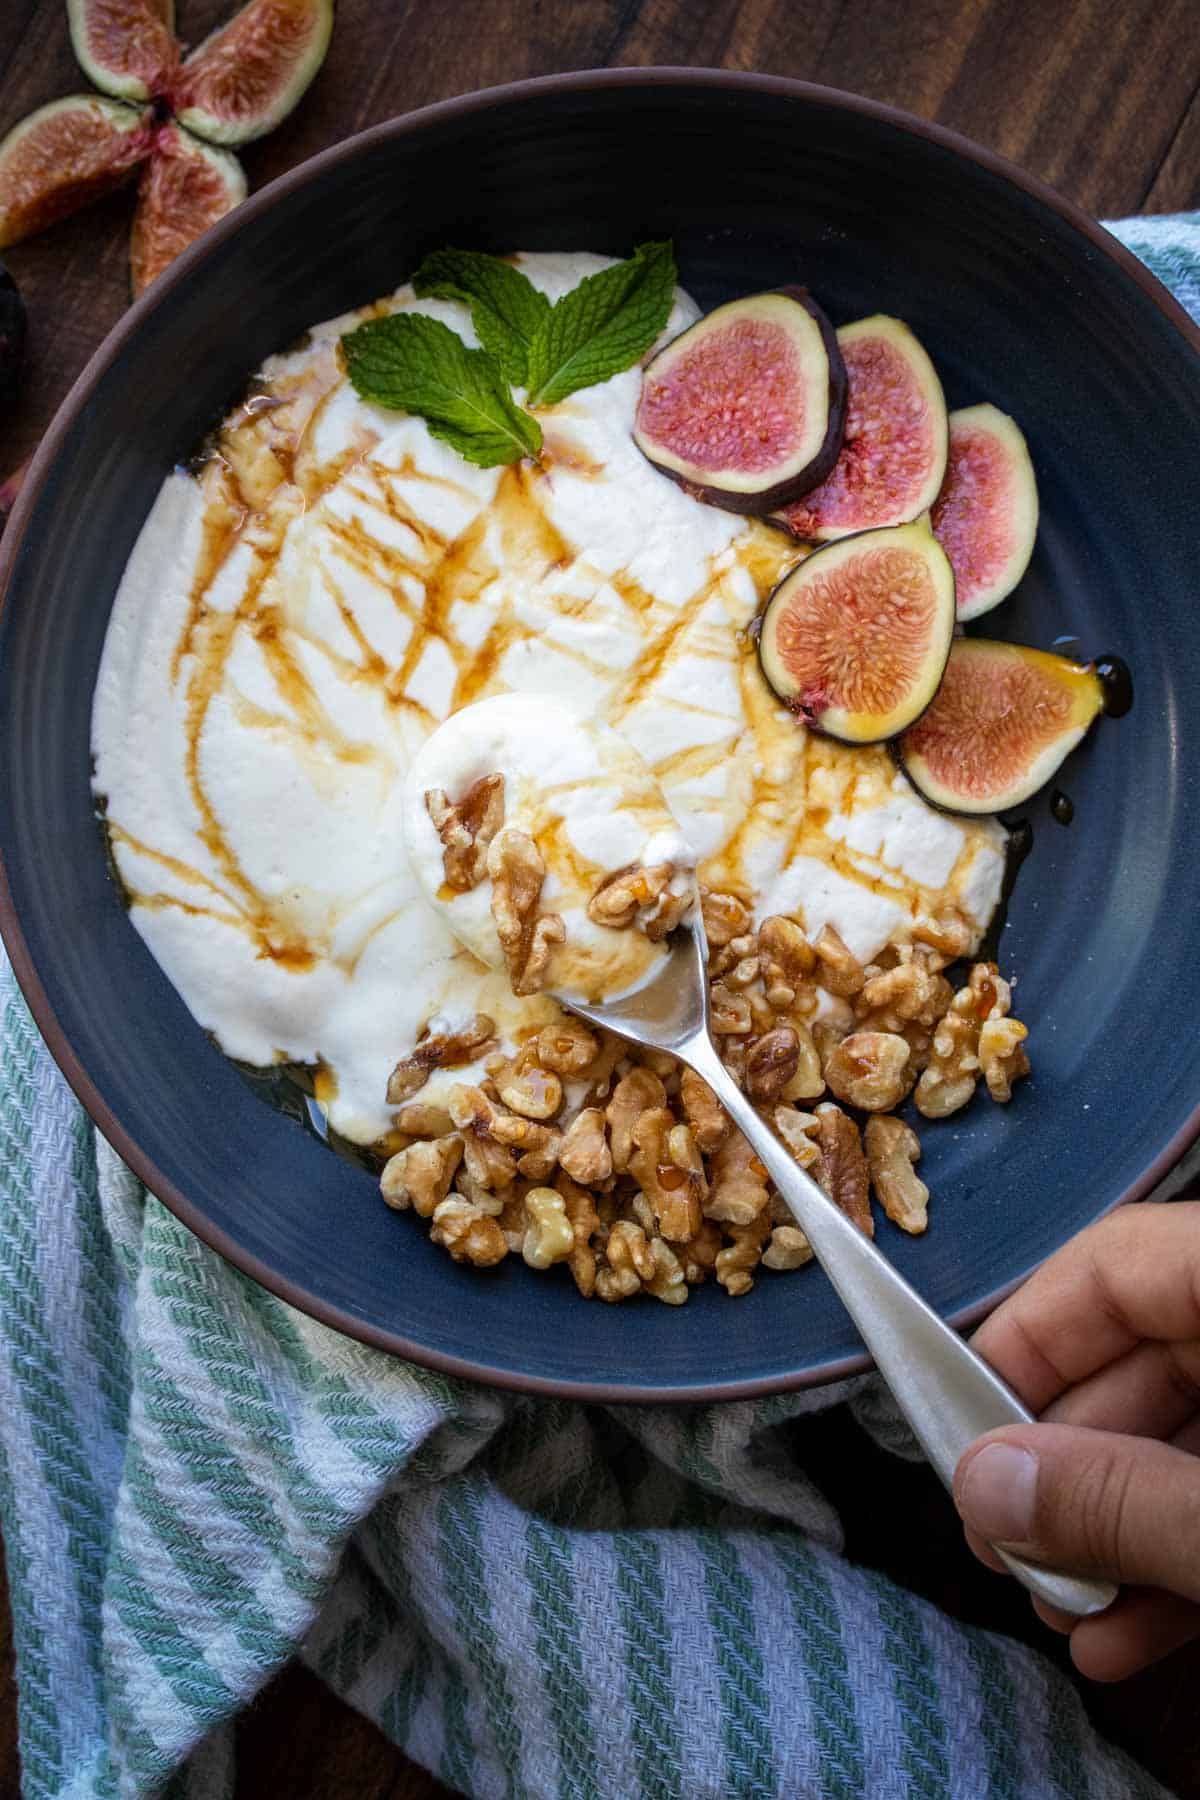 Spoon getting a bite from a bowl of white yogurt topped with nuts and fruit